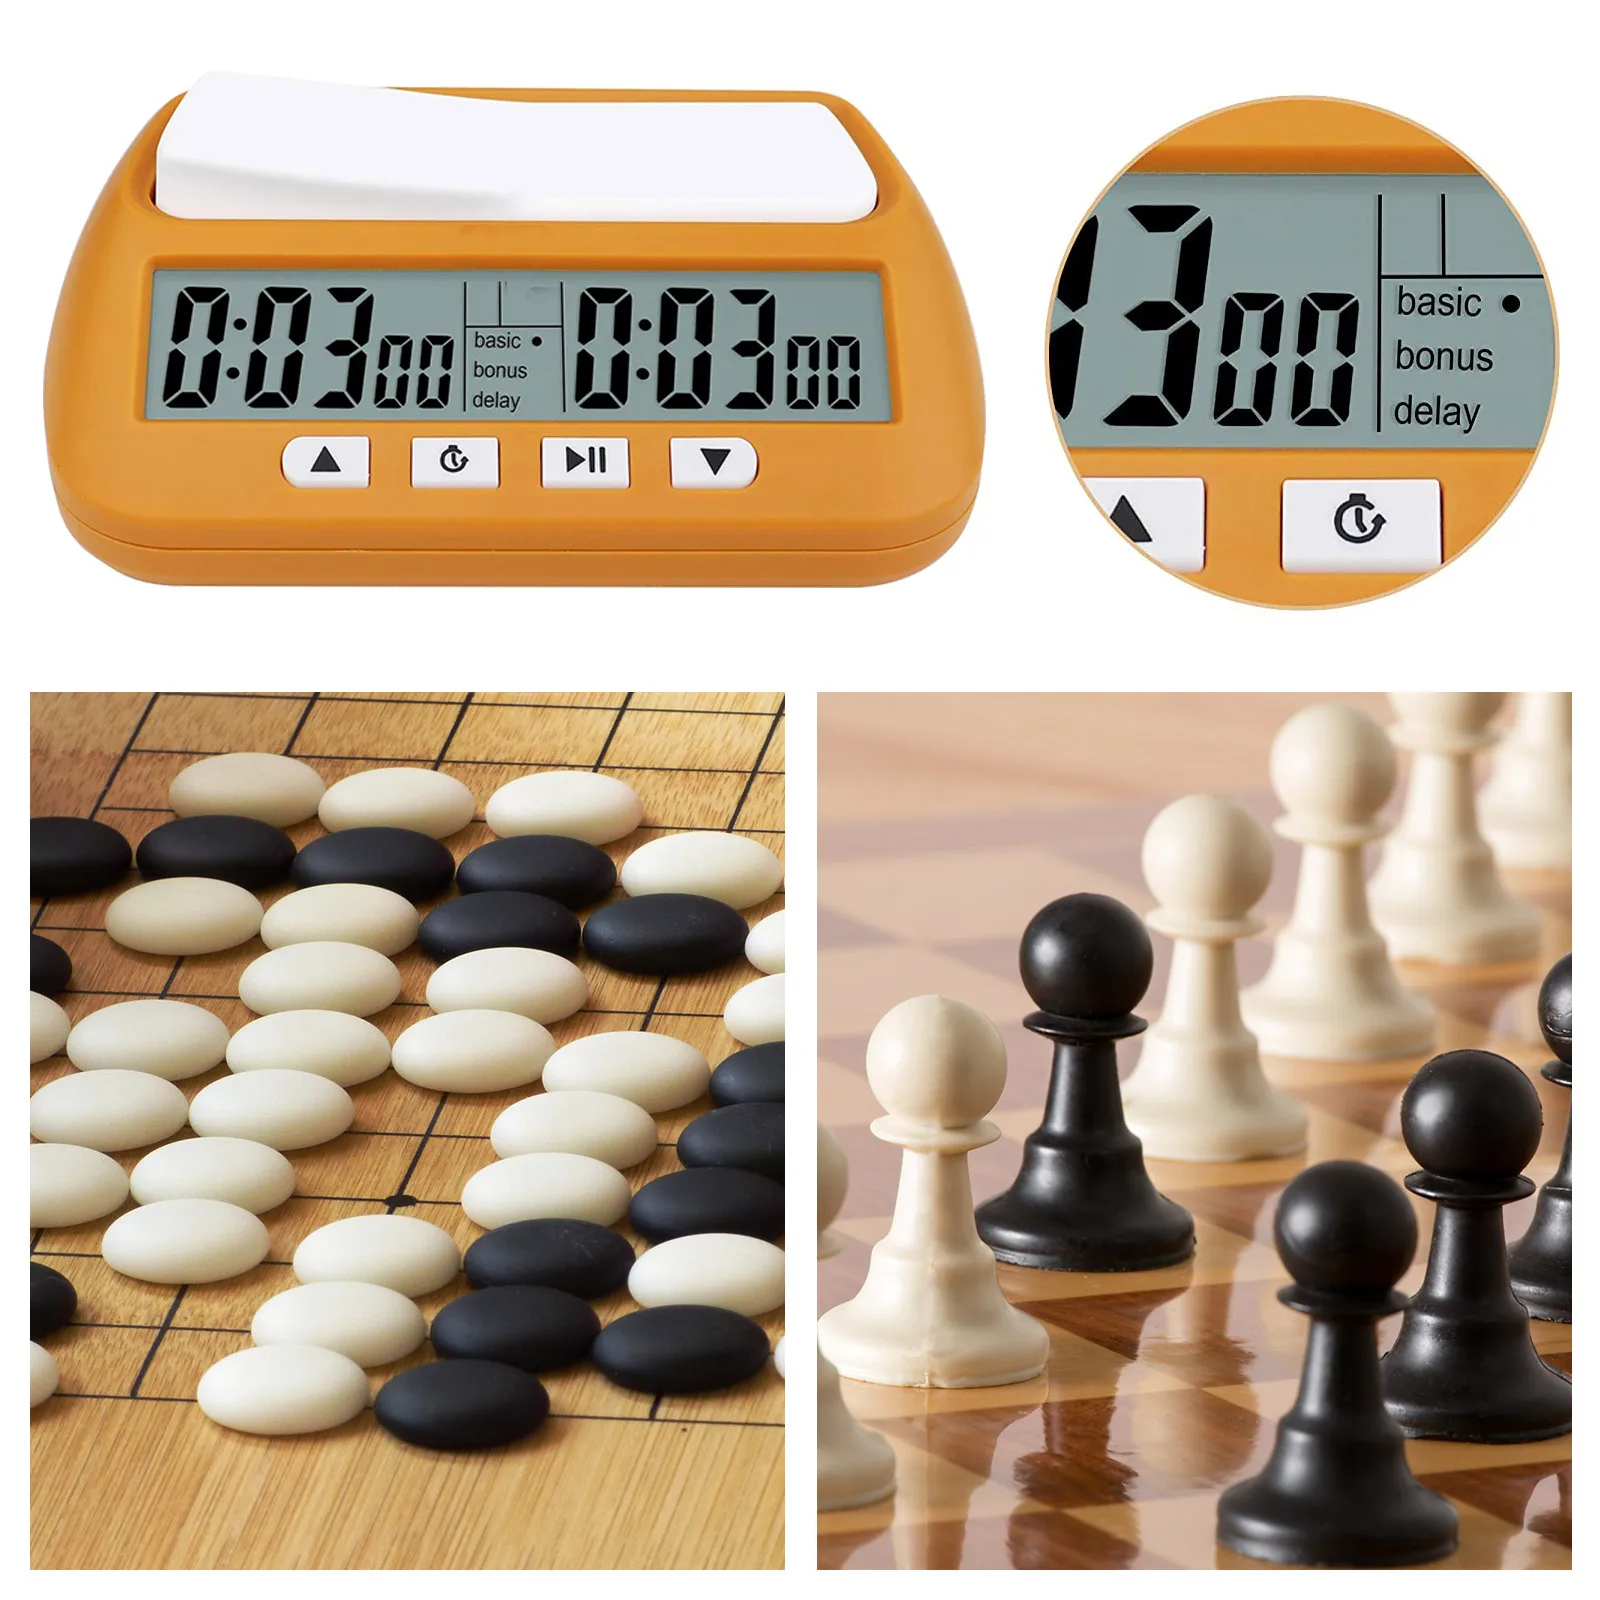 EgoEra® Professional Compact Digital Chess Clock Count Up Down Timer Electronic 